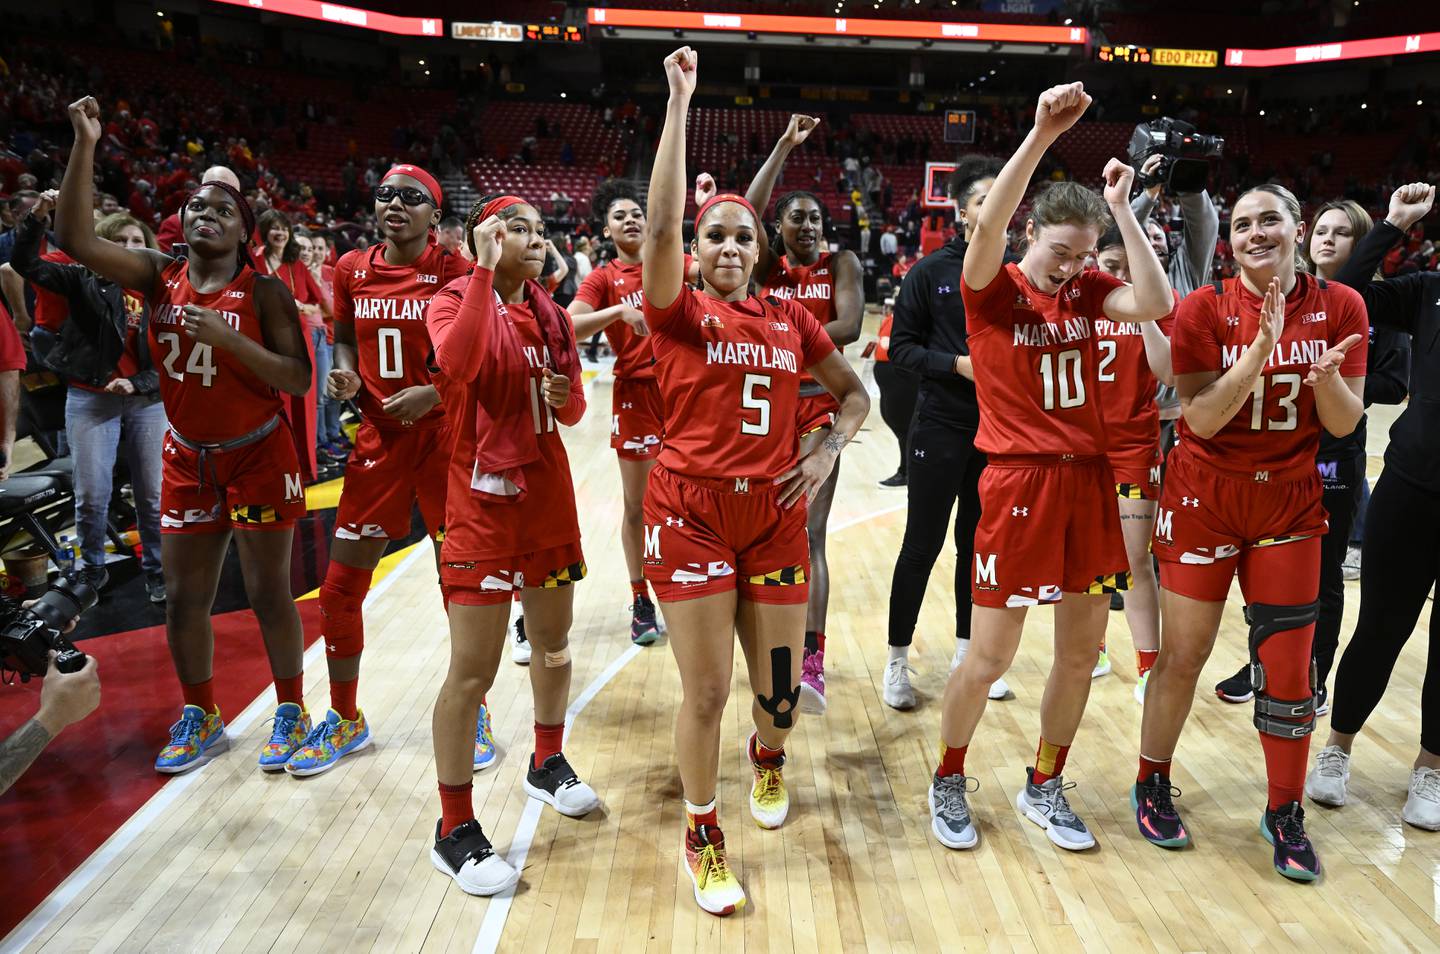 COLLEGE PARK, MARYLAND - FEBRUARY 21: The Maryland Terrapins celebrate after a 96-68 victory against the Iowa Hawkeyes at Xfinity Center on February 21, 2023 in College Park, Maryland.